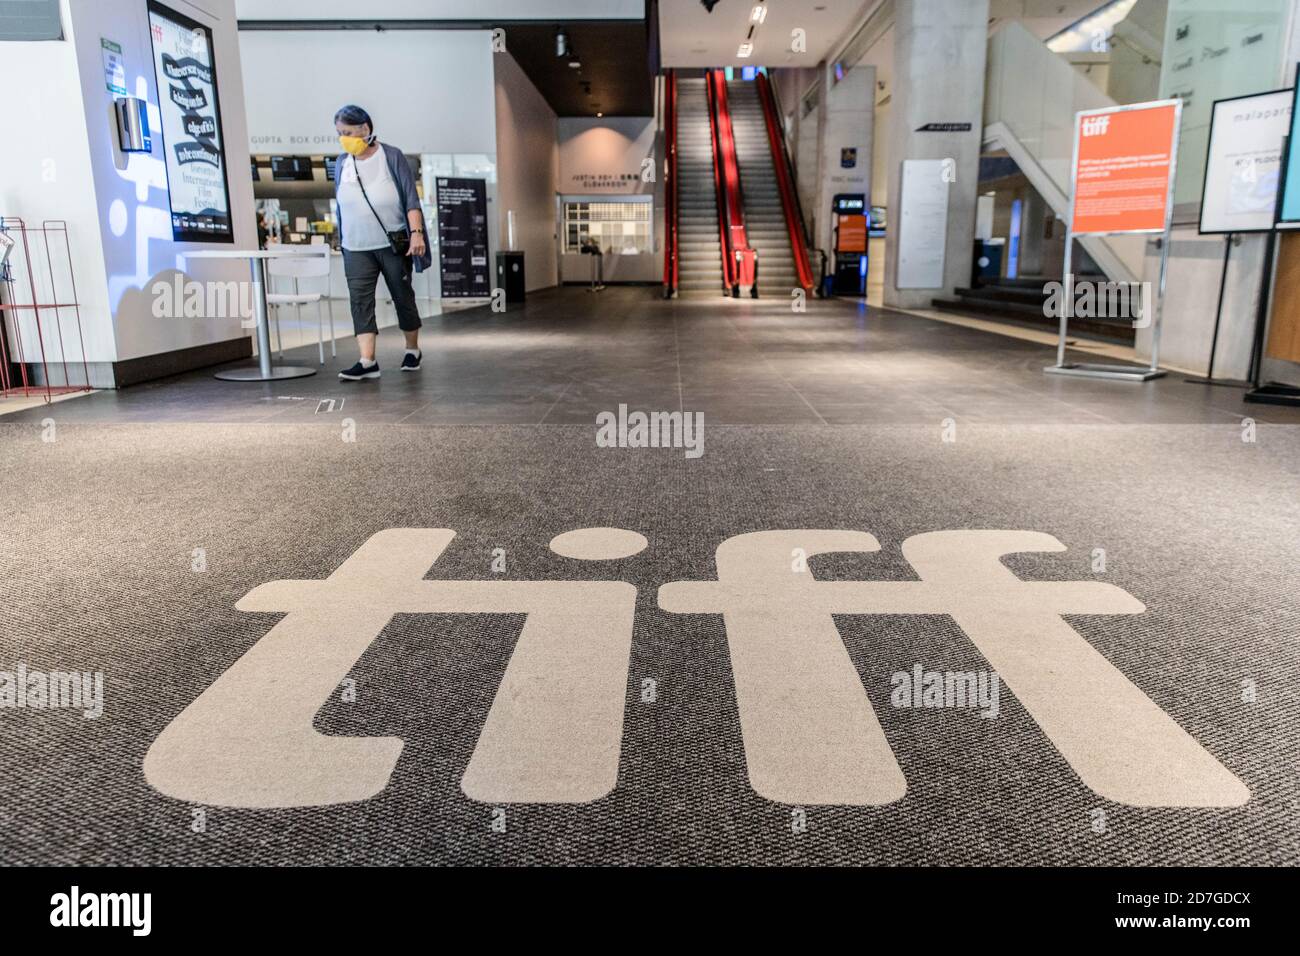 Toronto, Ontario, Canada. 11th Sep, 2020. A person wearing a face mask at TIFF Bell Lightbox which is nearly-empty during 2020 Toronto International Film Festival, mostly a virtual festival this year. Credit: Shawn Goldberg/SOPA Images/ZUMA Wire/Alamy Live News Stock Photo